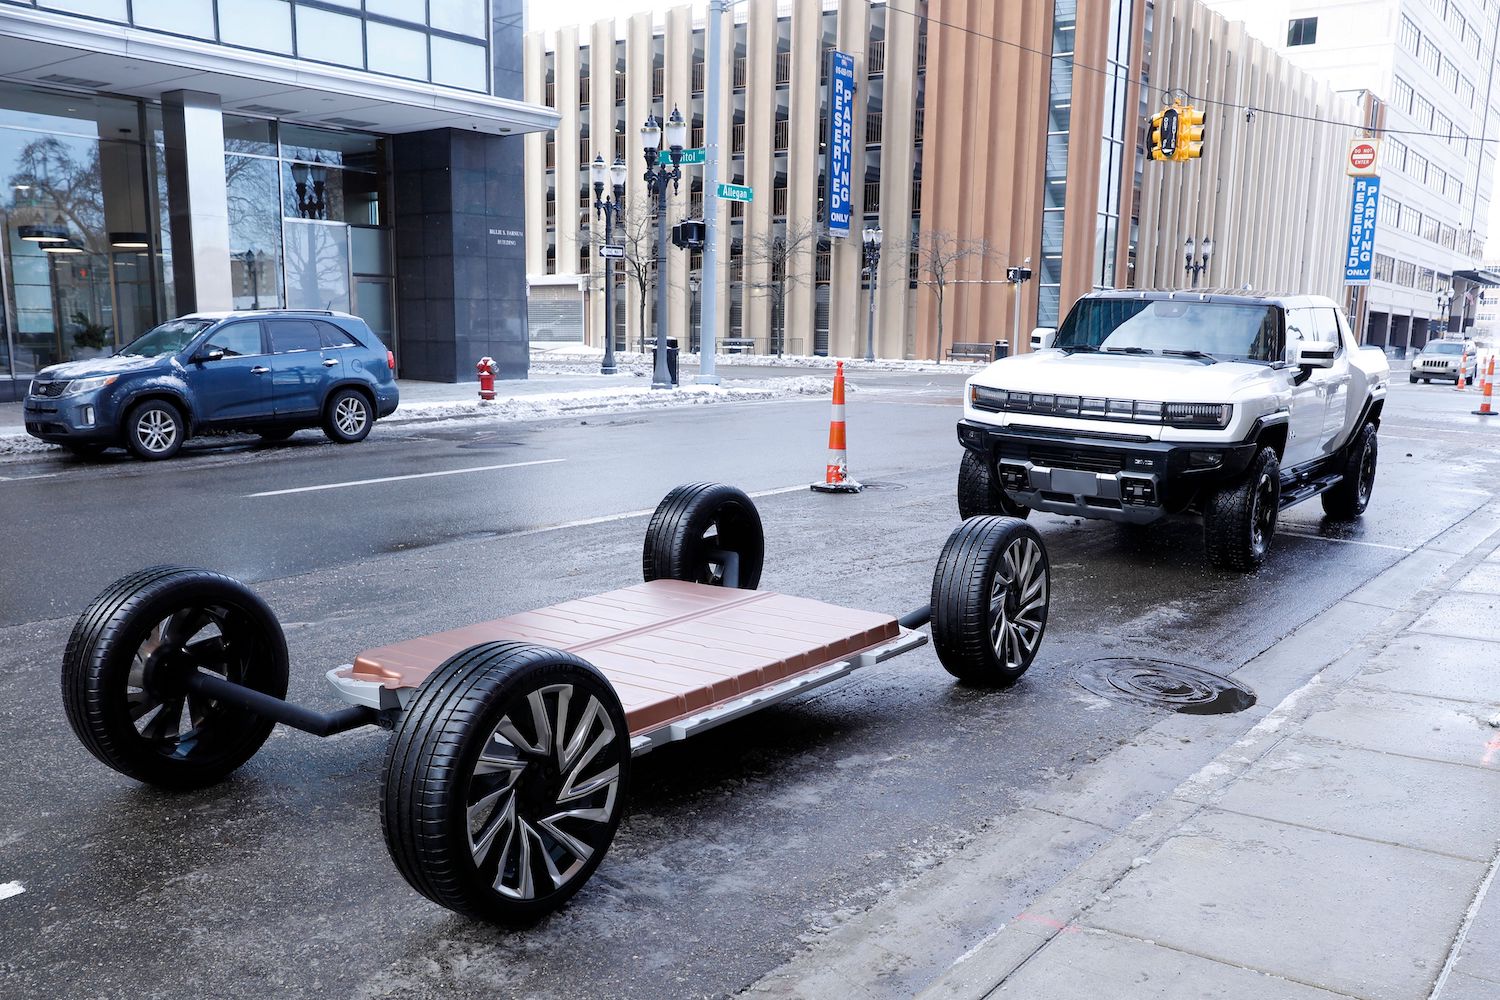 The new GMC Hummer EV and its Ultium battery pack parked on the street in Michigan.